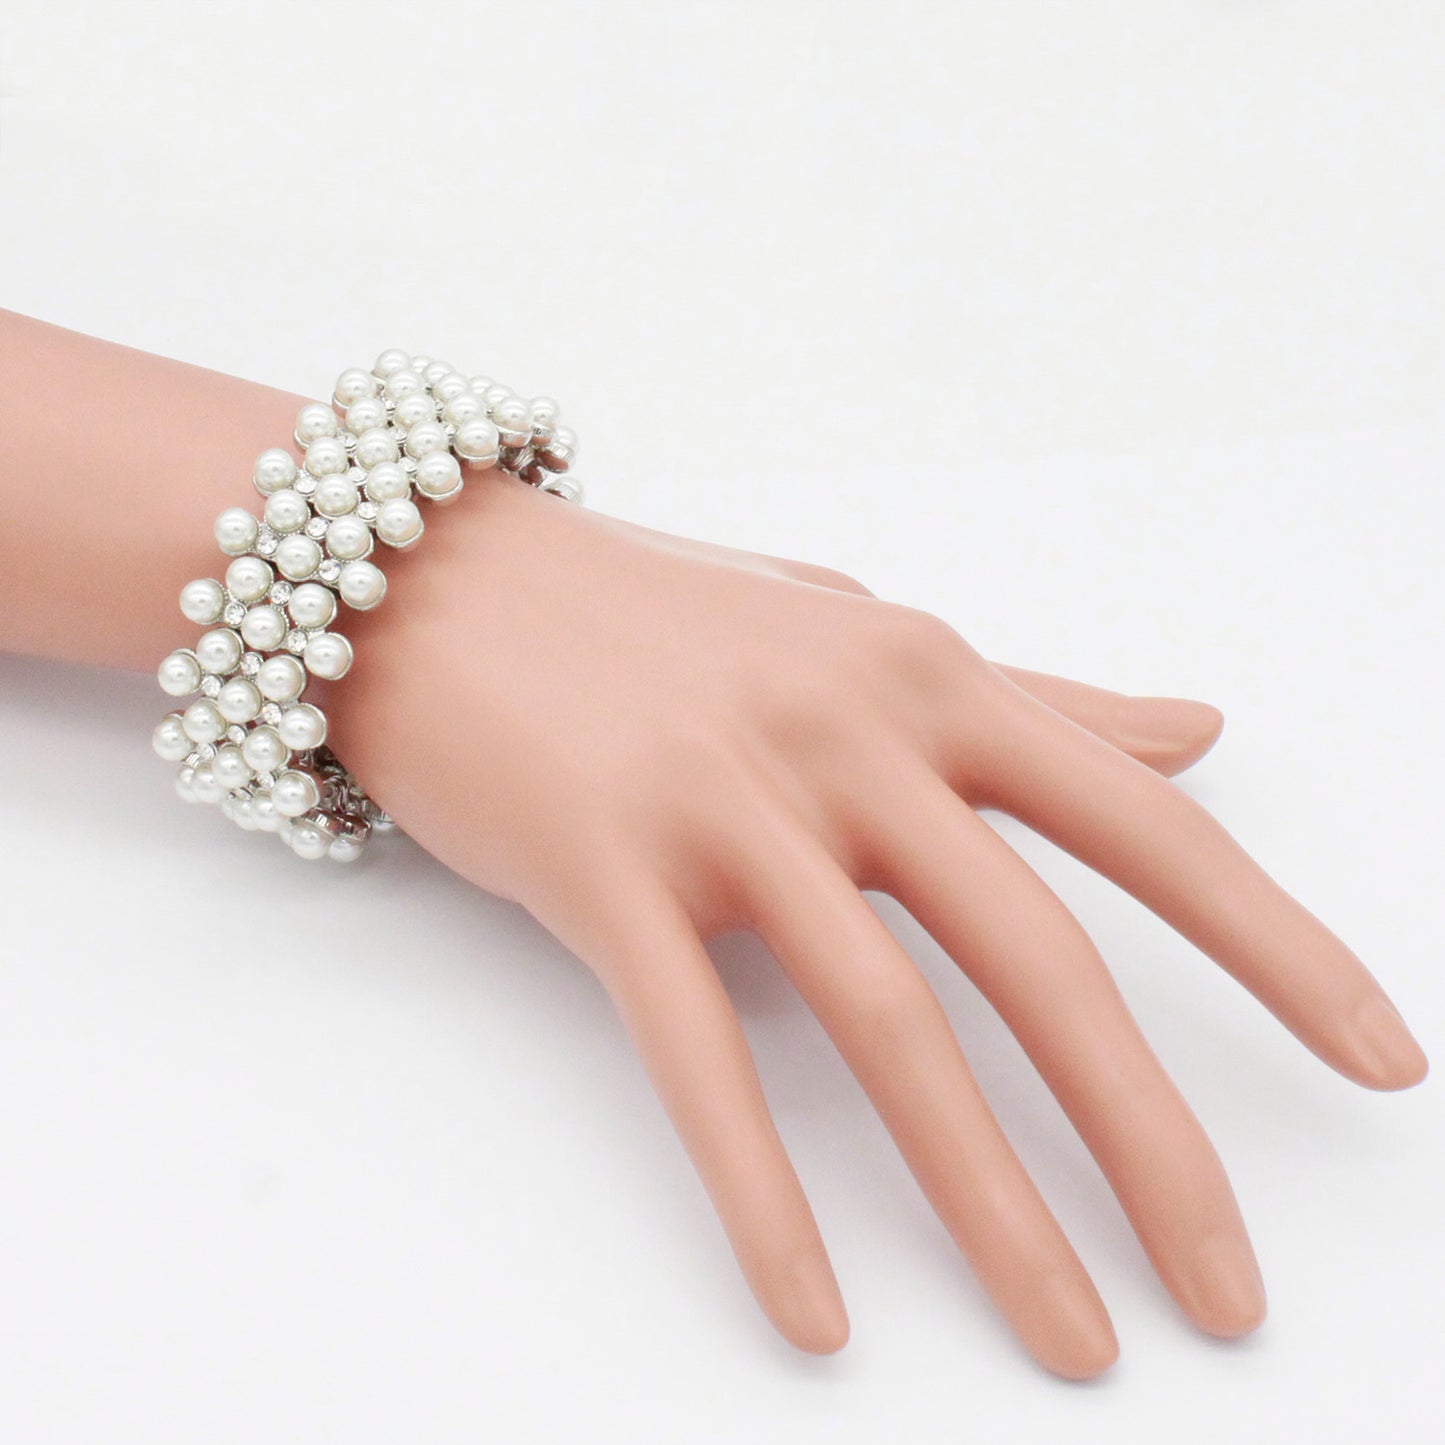 Lavencious Simulated Pearl 5 Lines Elastic Stretch Bracelet Party Jewelry for Women - Silver